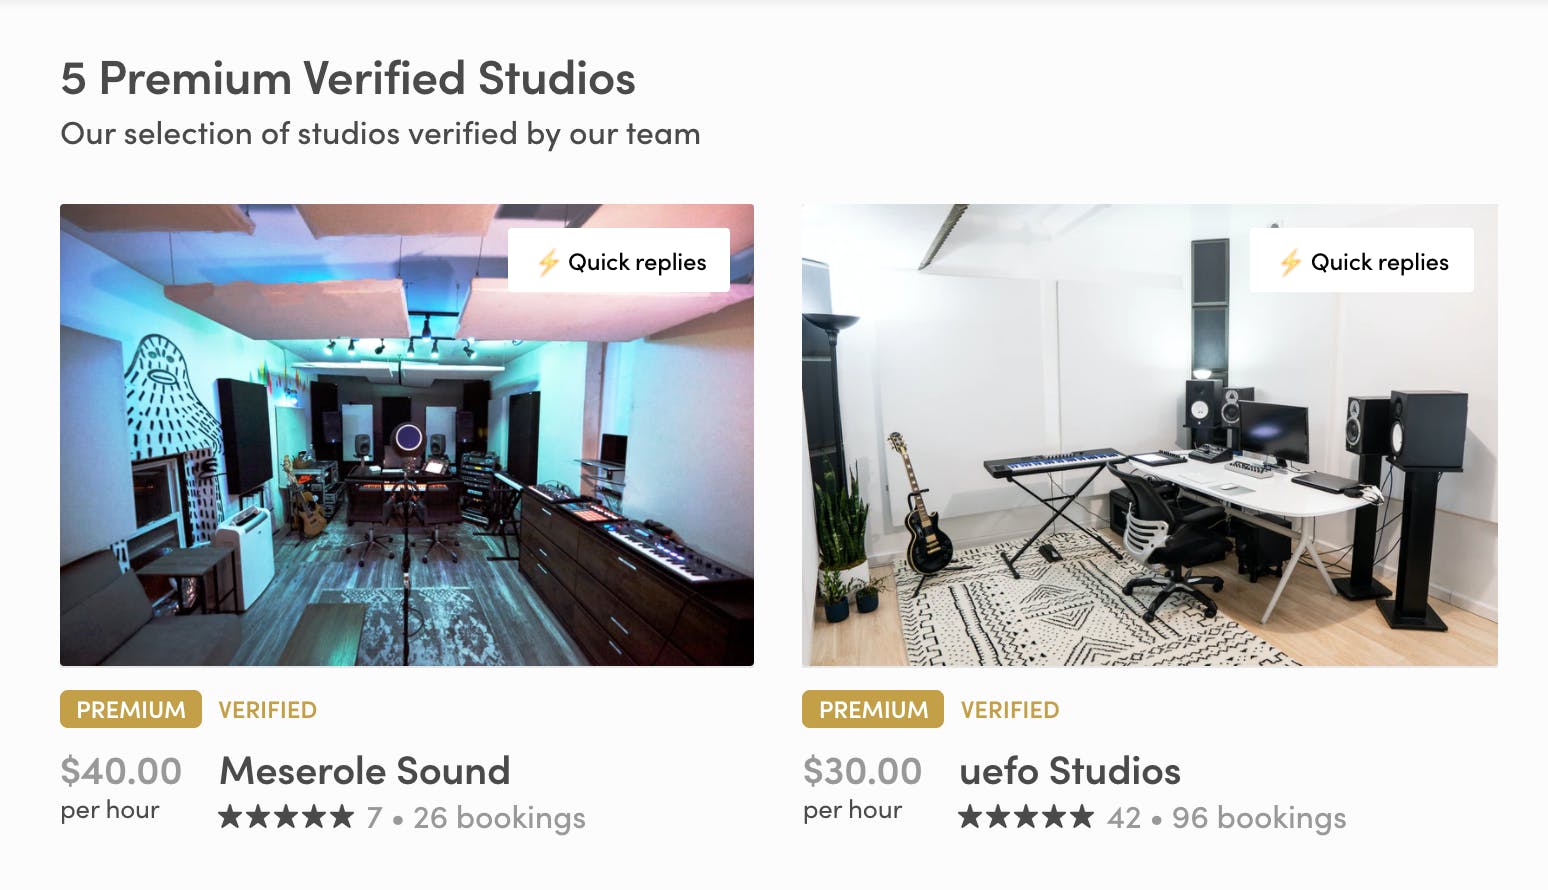 Screenshot from Studiotime marketplace design, showing the images and five-star ratings of two verified listings.